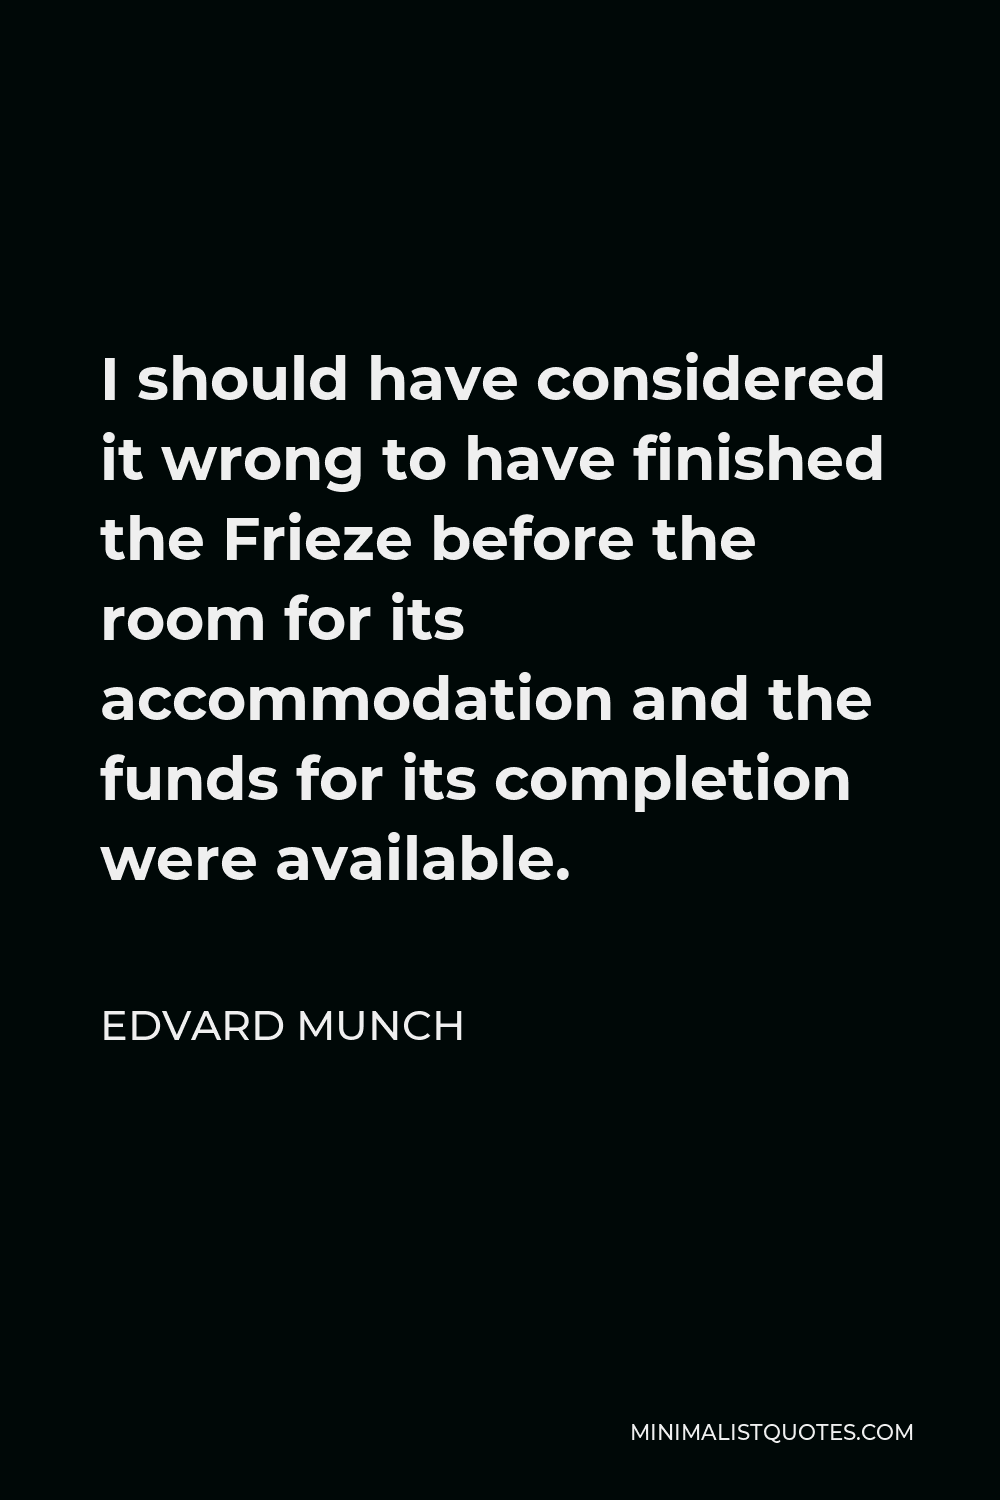 Edvard Munch Quote - I should have considered it wrong to have finished the Frieze before the room for its accommodation and the funds for its completion were available.